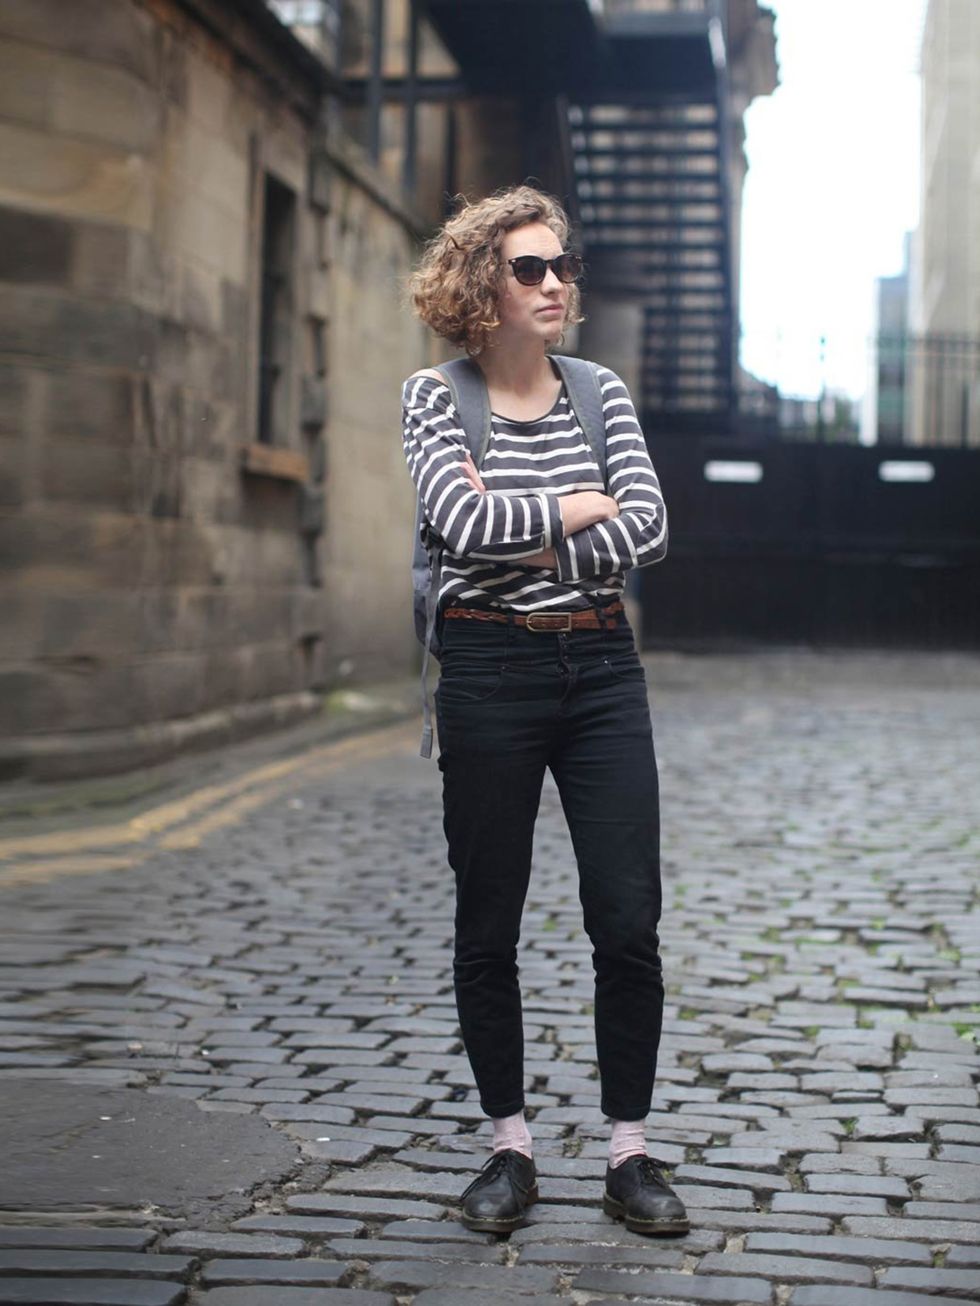 <p>Natalie wears <a href="http://www.petit-bateau.co.uk/">Petit Bateau</a> top, vintage belt, <a href="http://www.topshop.com/?geoip=home%23">Topshop</a> jeans and <a href="http://uk.drmartens.com/uk/">Dr. Martens</a> shoes.<em>More street style galleries